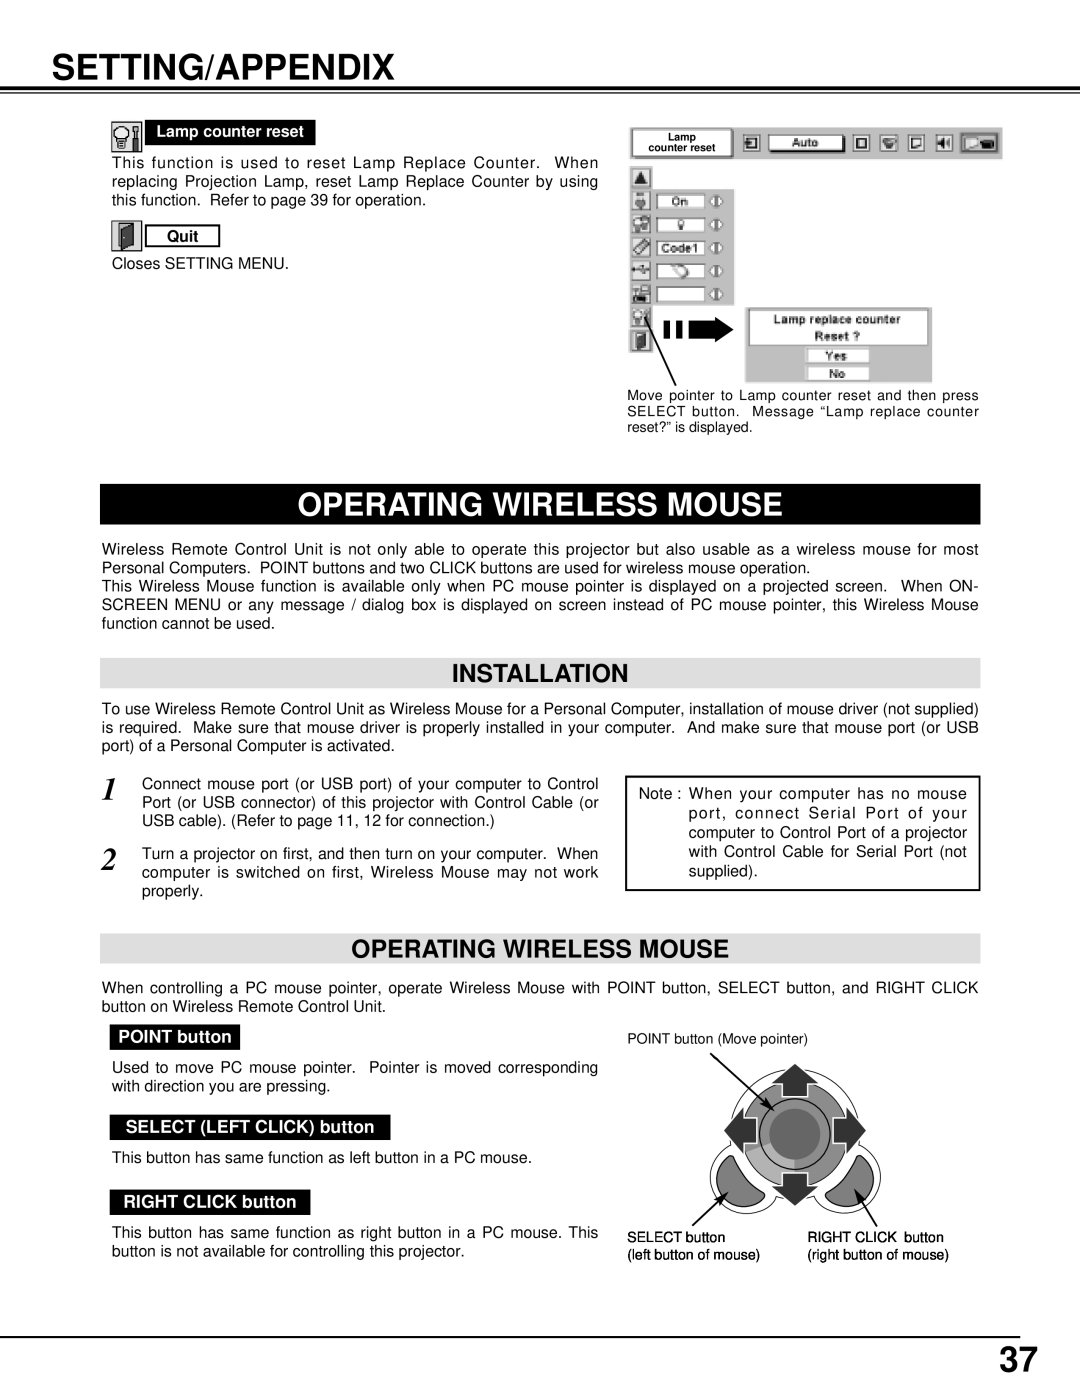 Eiki LC-X986 instruction manual Setting/Appendix, Operating Wireless Mouse, Quit 